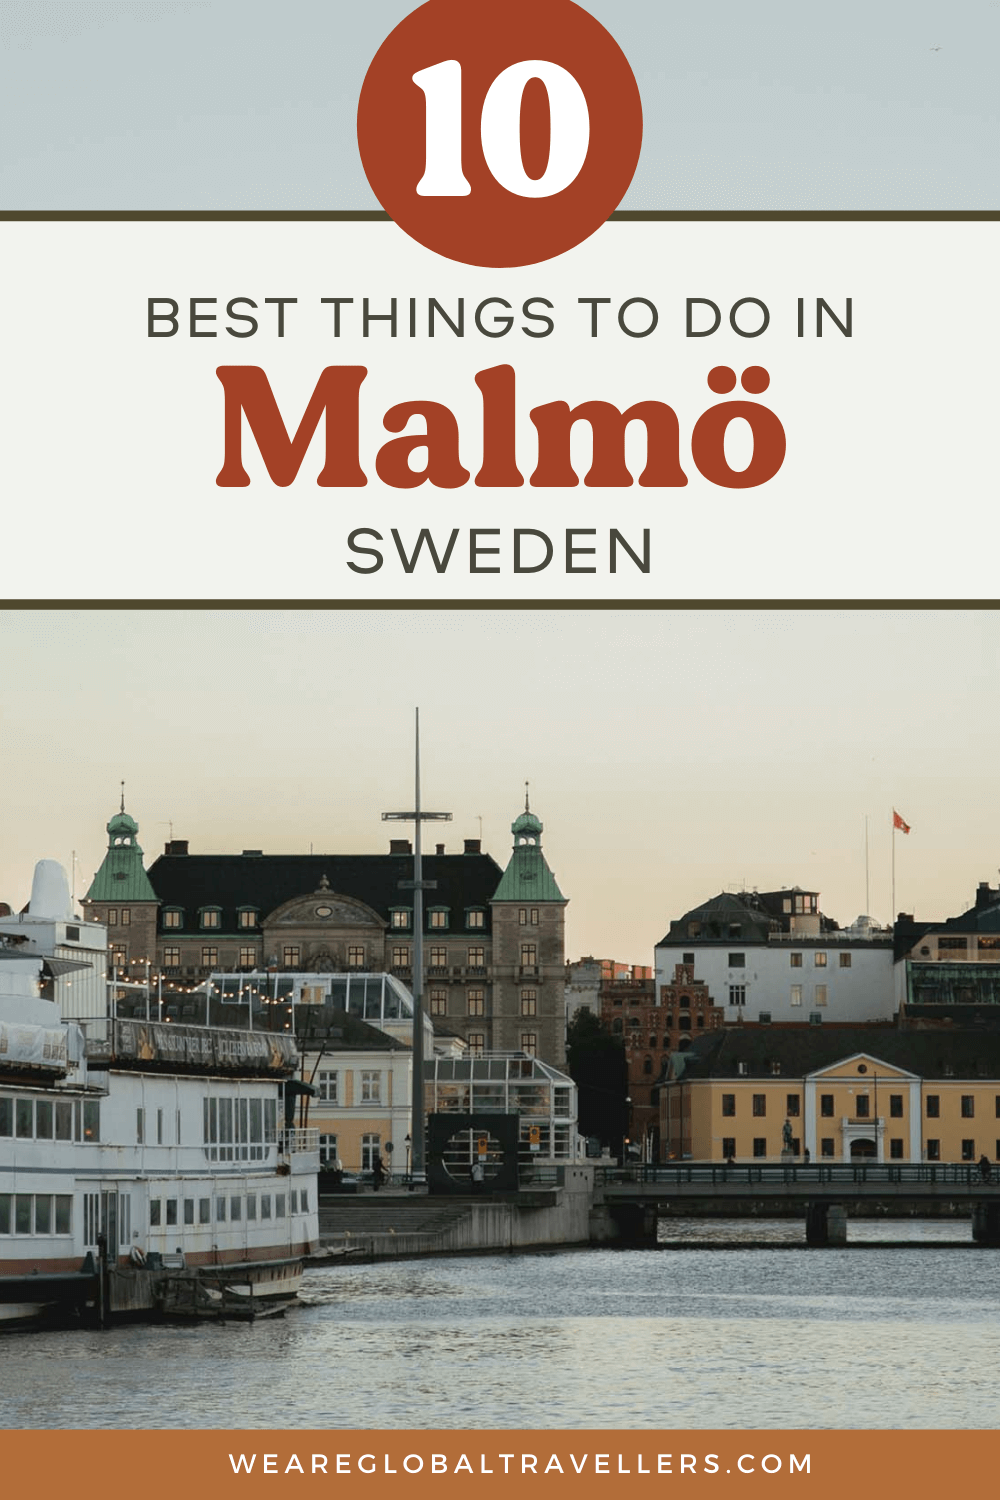 The best things to do in Malmö, Sweden